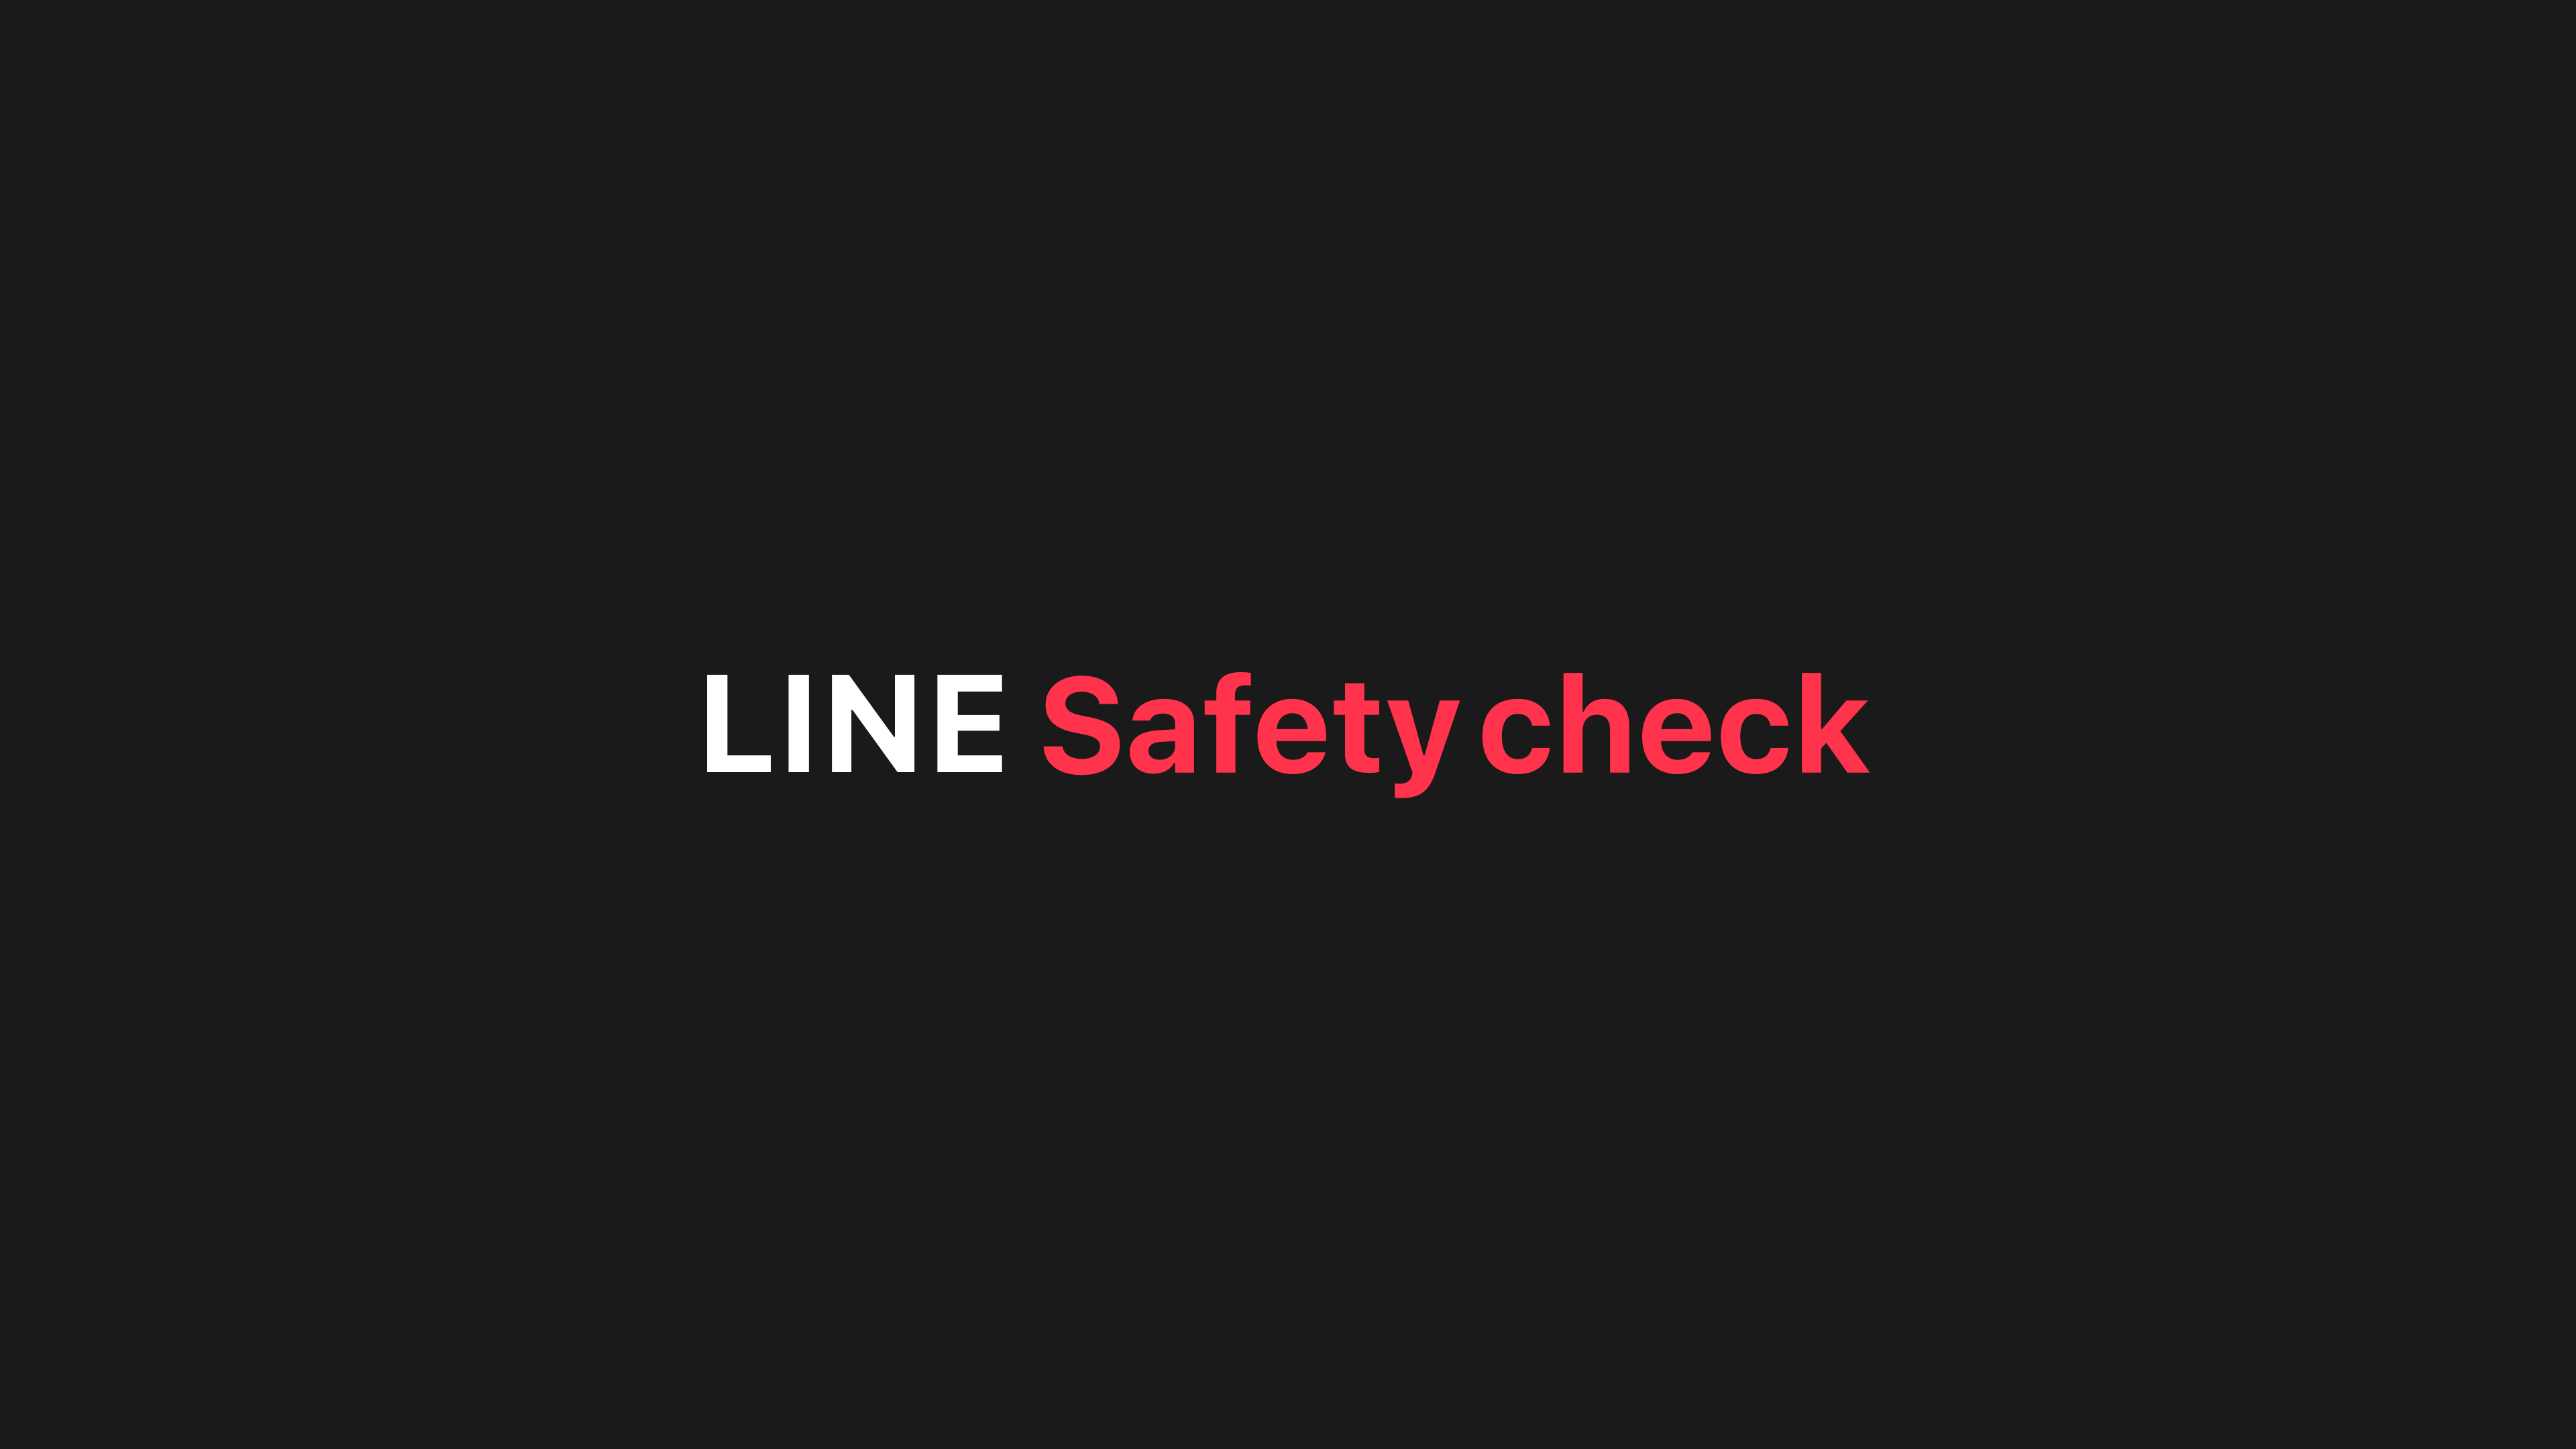 Safety Check - Communication Tool during Disasters